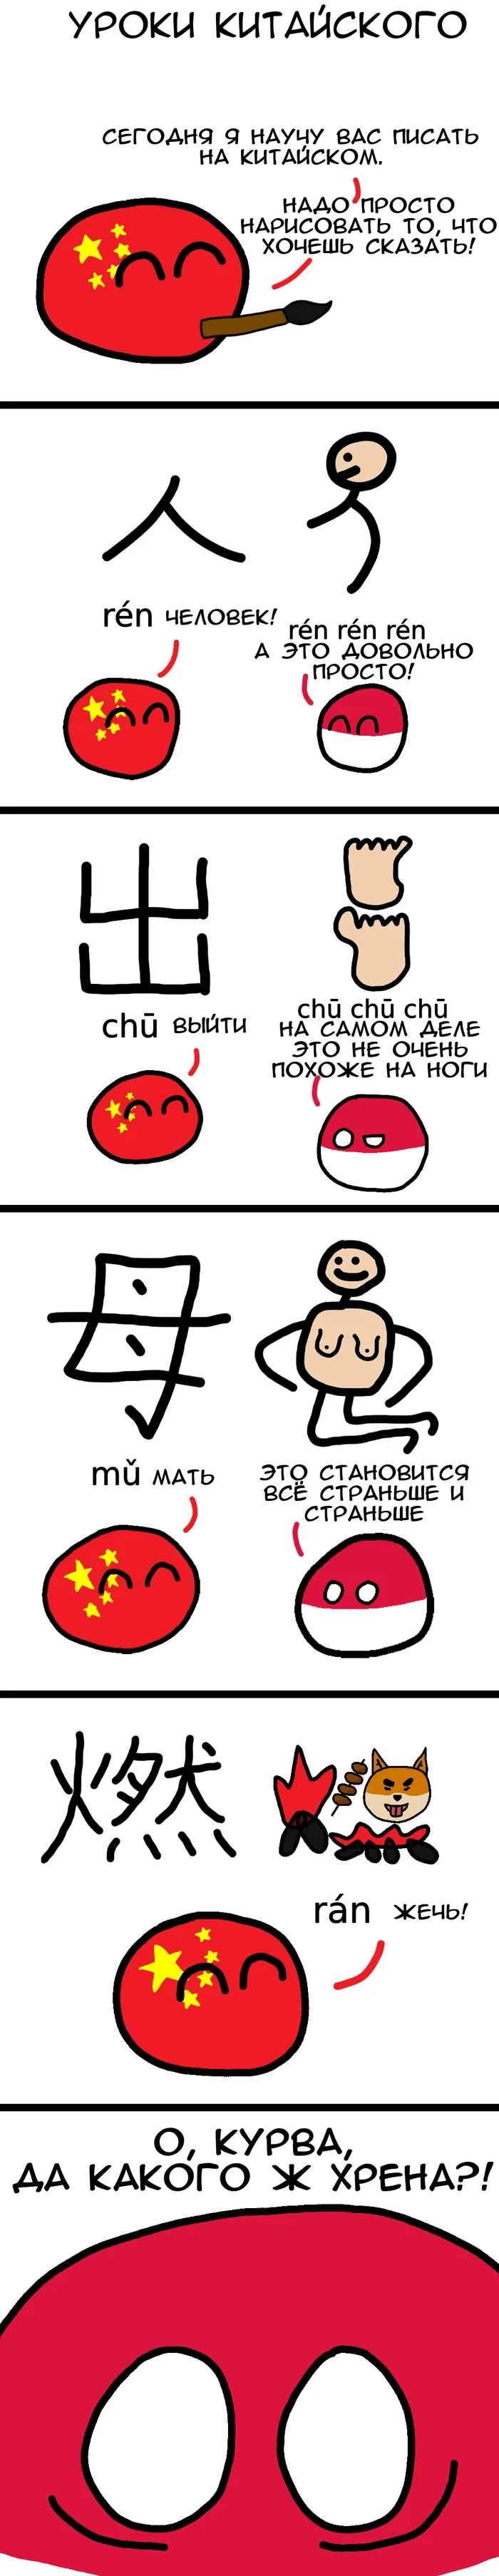 Chinese lessons - Countryballs, Comics, Picture with text, VKontakte (link), Chinese, Dog, China, Translated by myself, Telegram (link), Reddit (link), Longpost